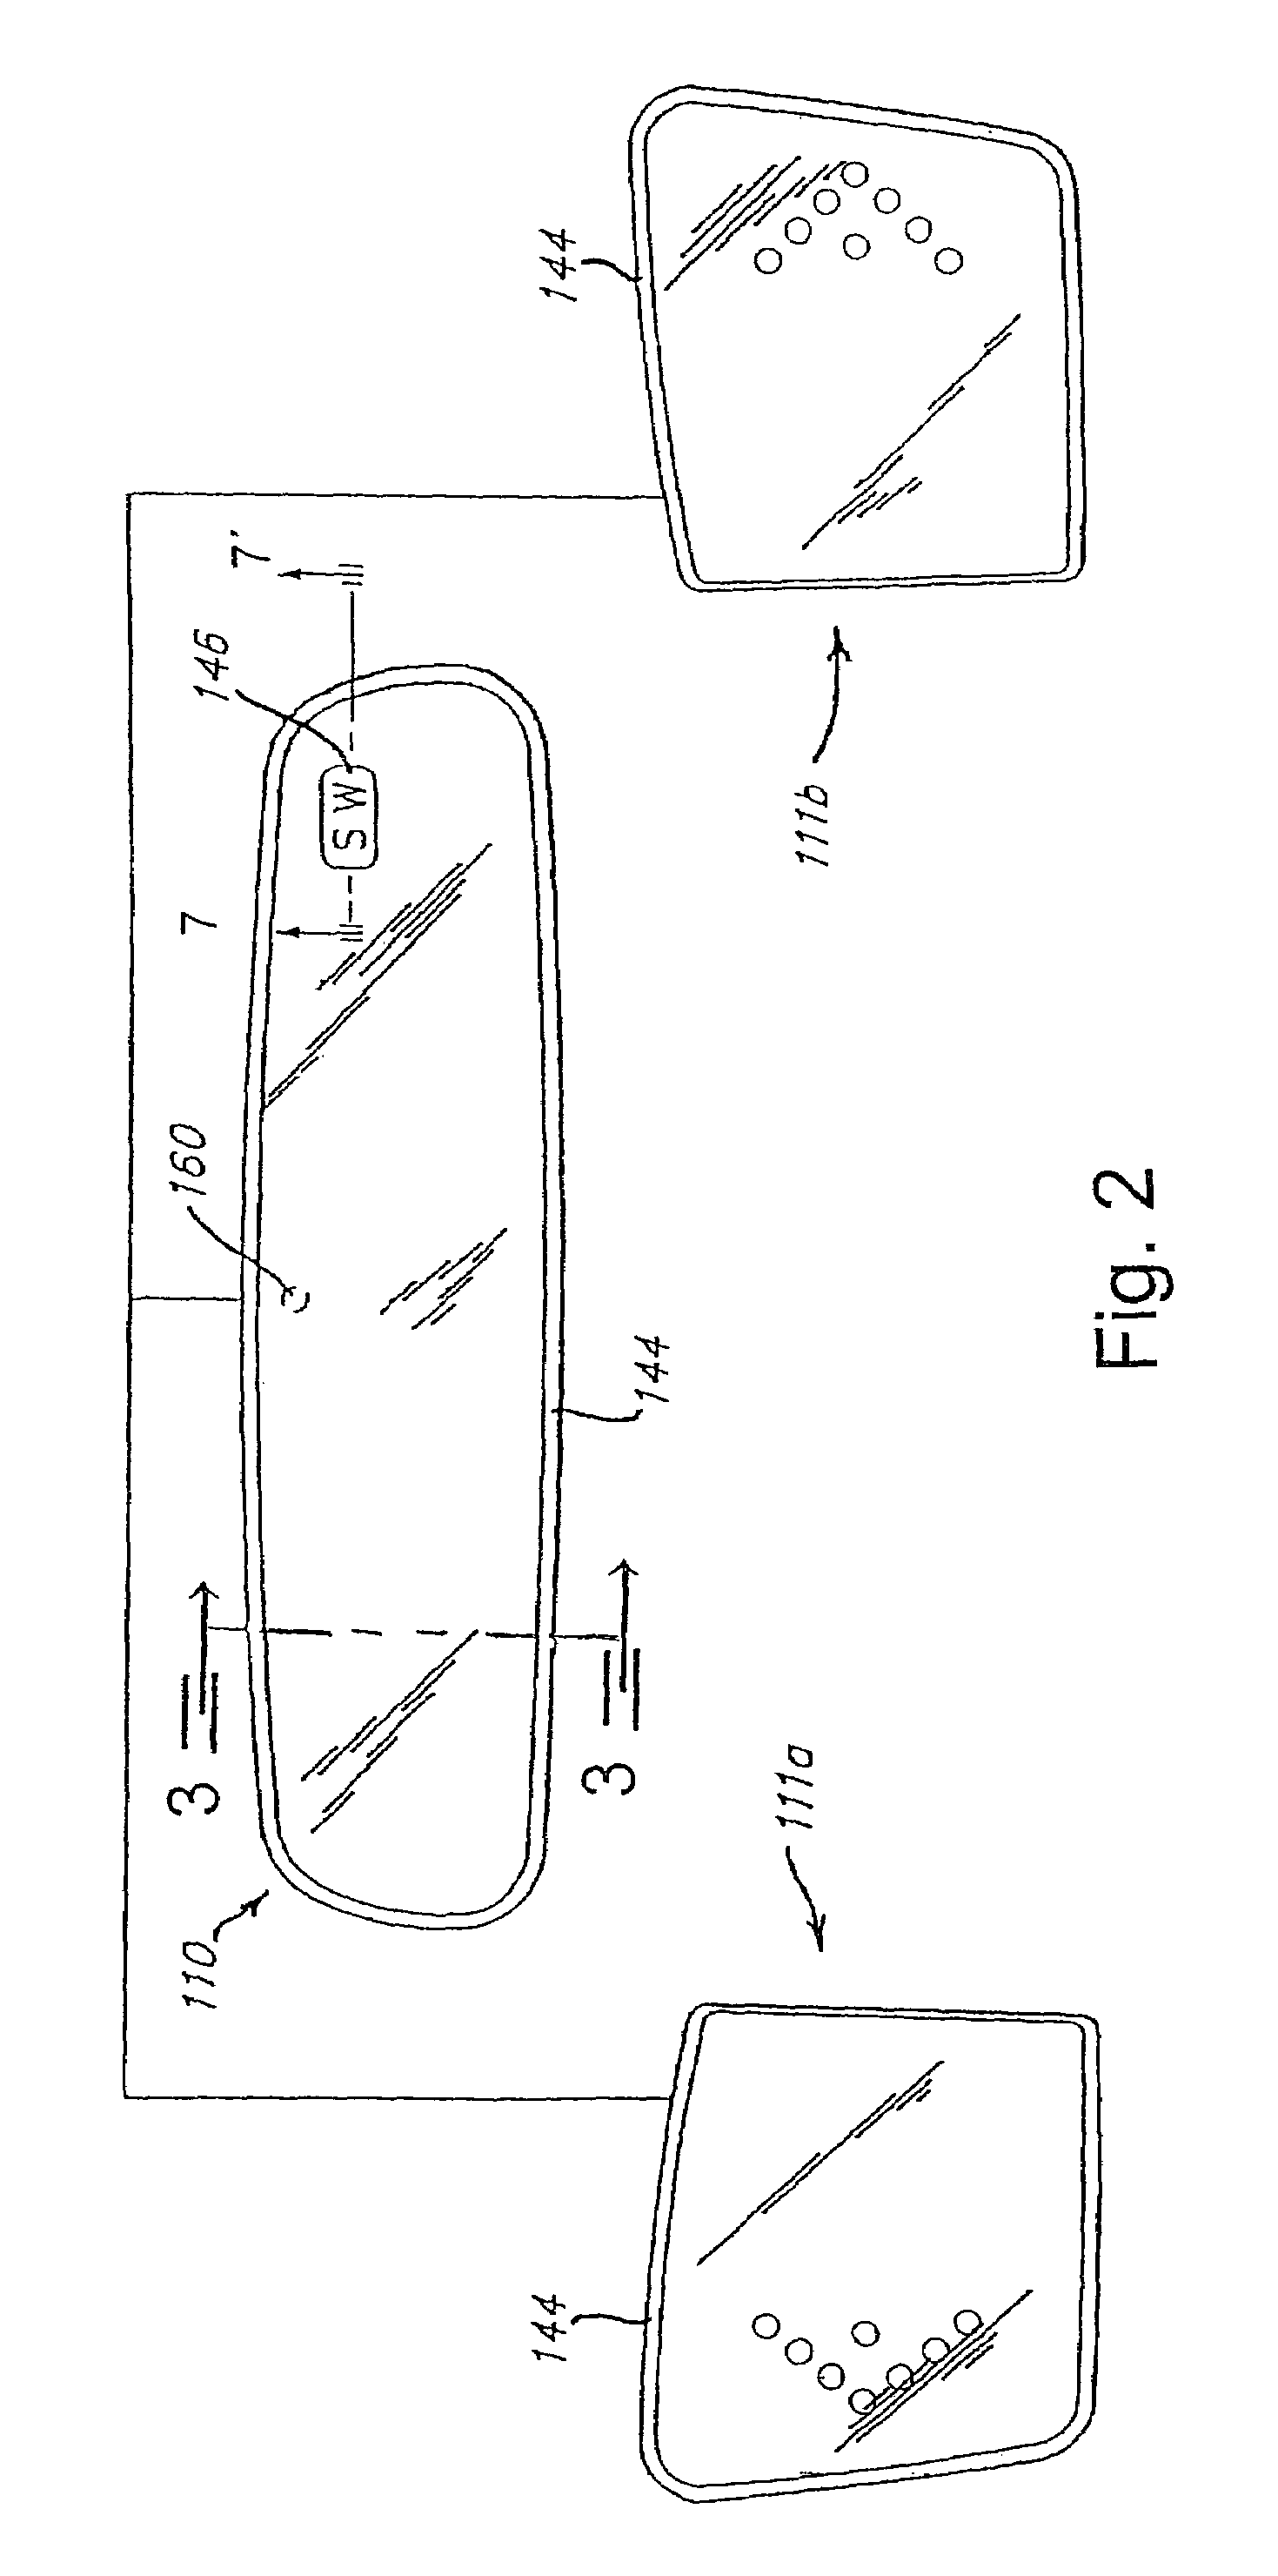 Electrochromic rearview mirror assembly incorporating a display/signal light